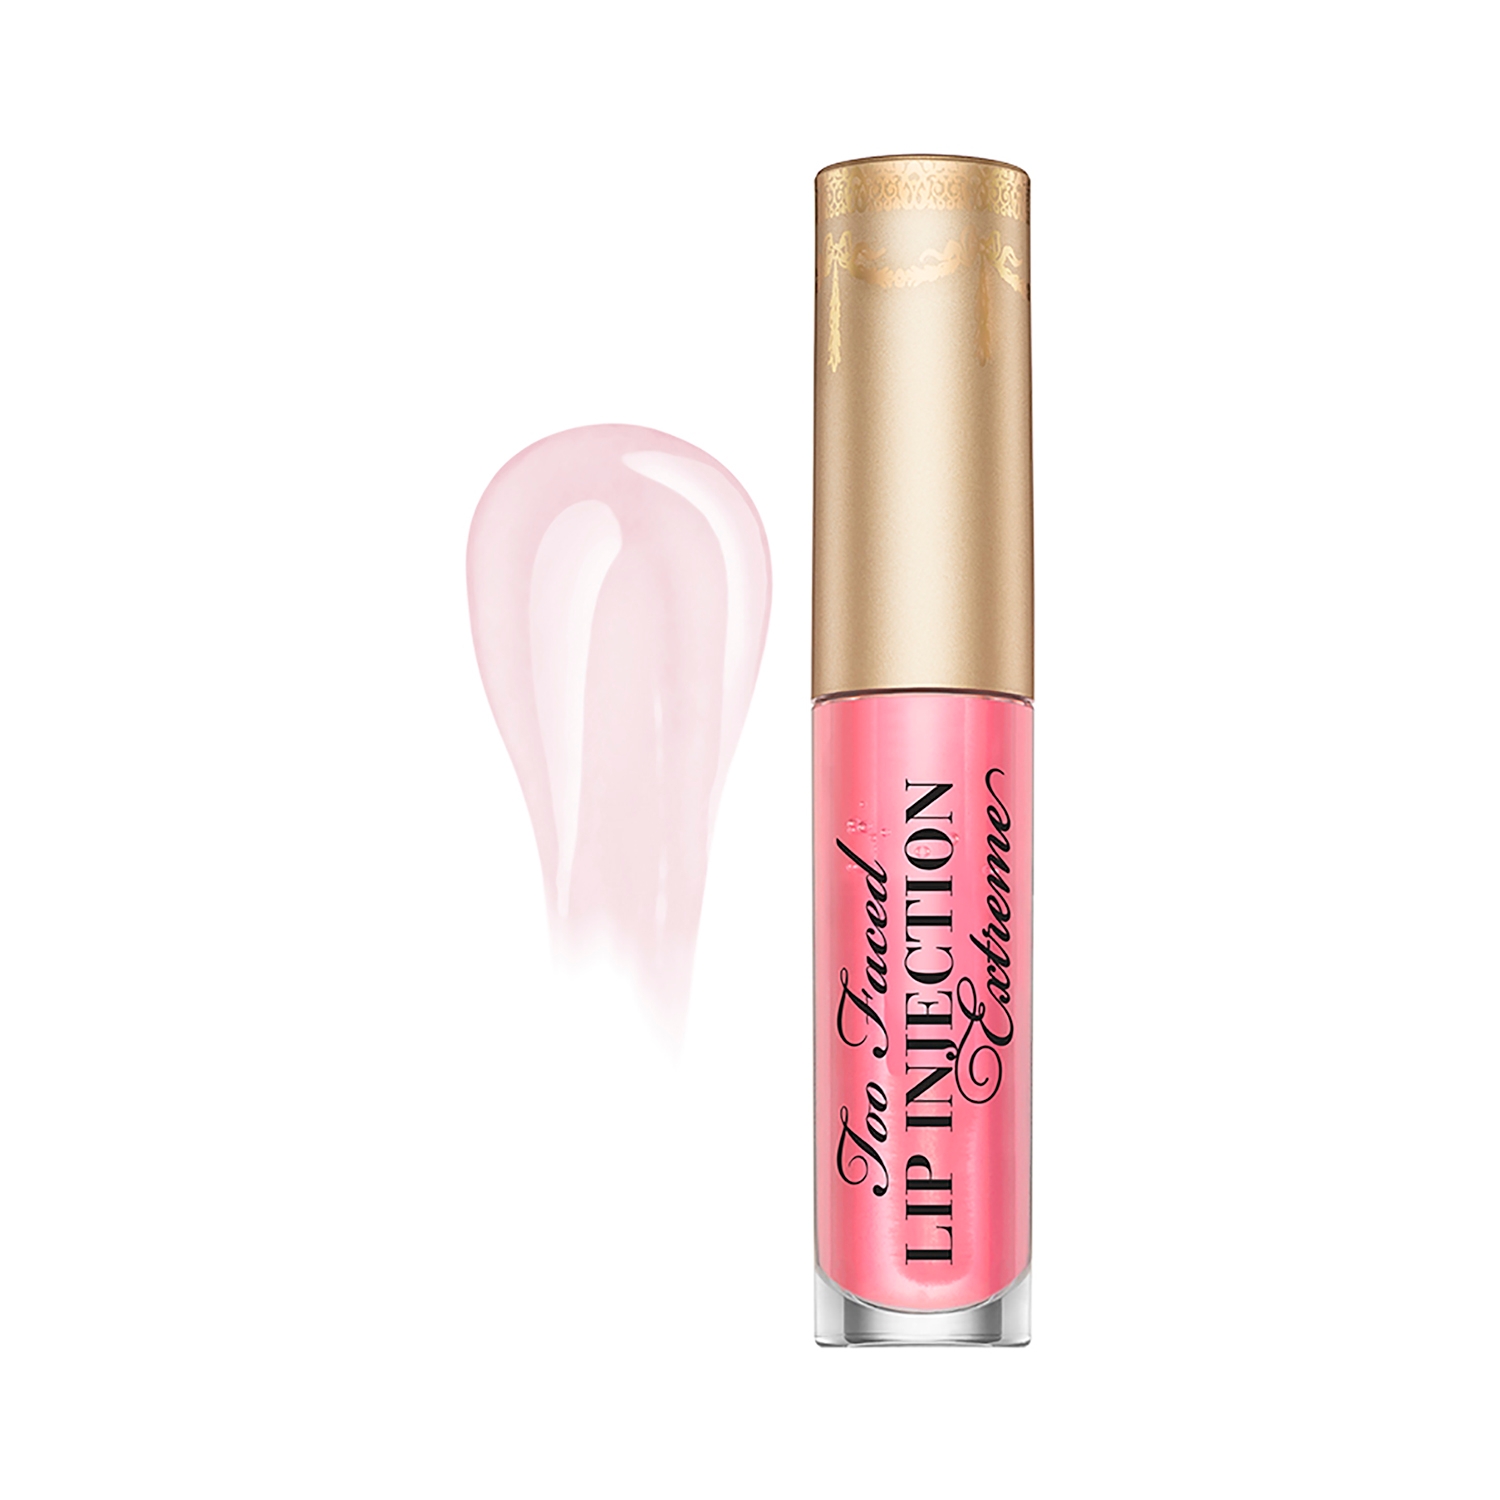 Too Faced | Too Faced Lip Injection Plumping Lip Gloss -  Bubblegum Yum (2.8g)